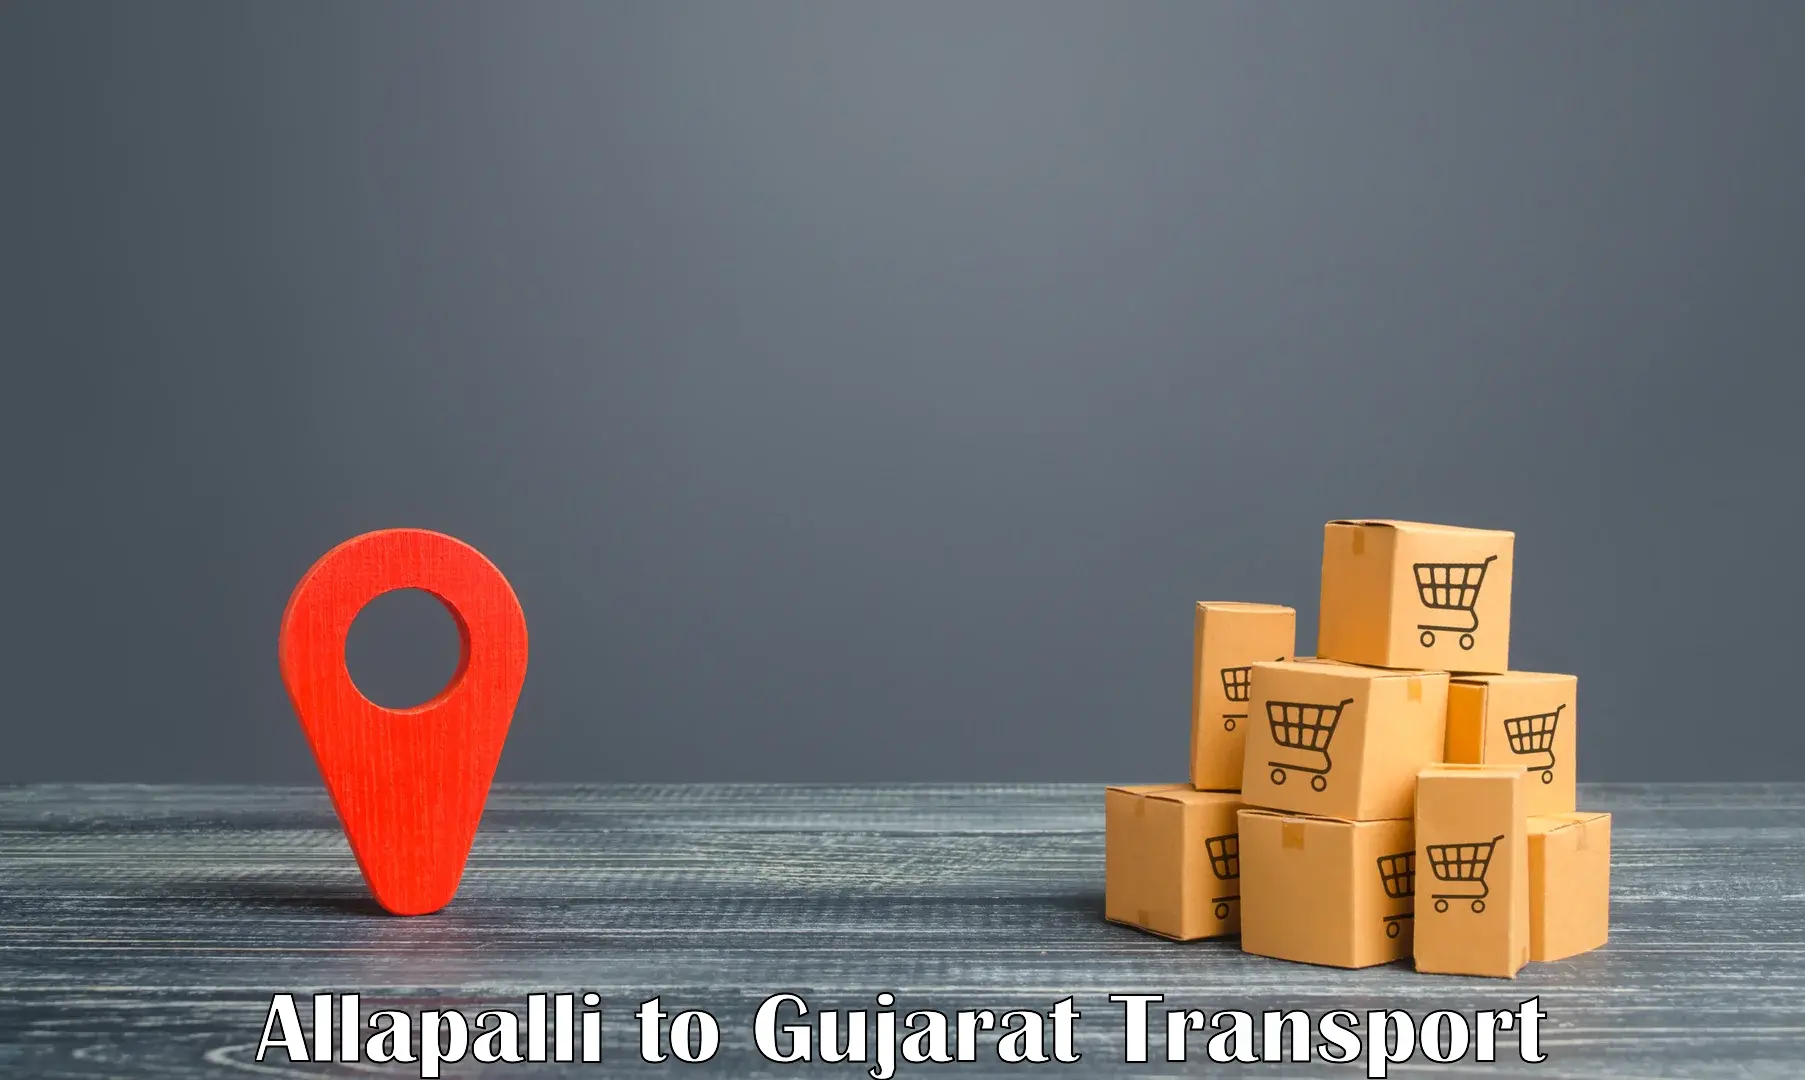 Commercial transport service Allapalli to Lunawada